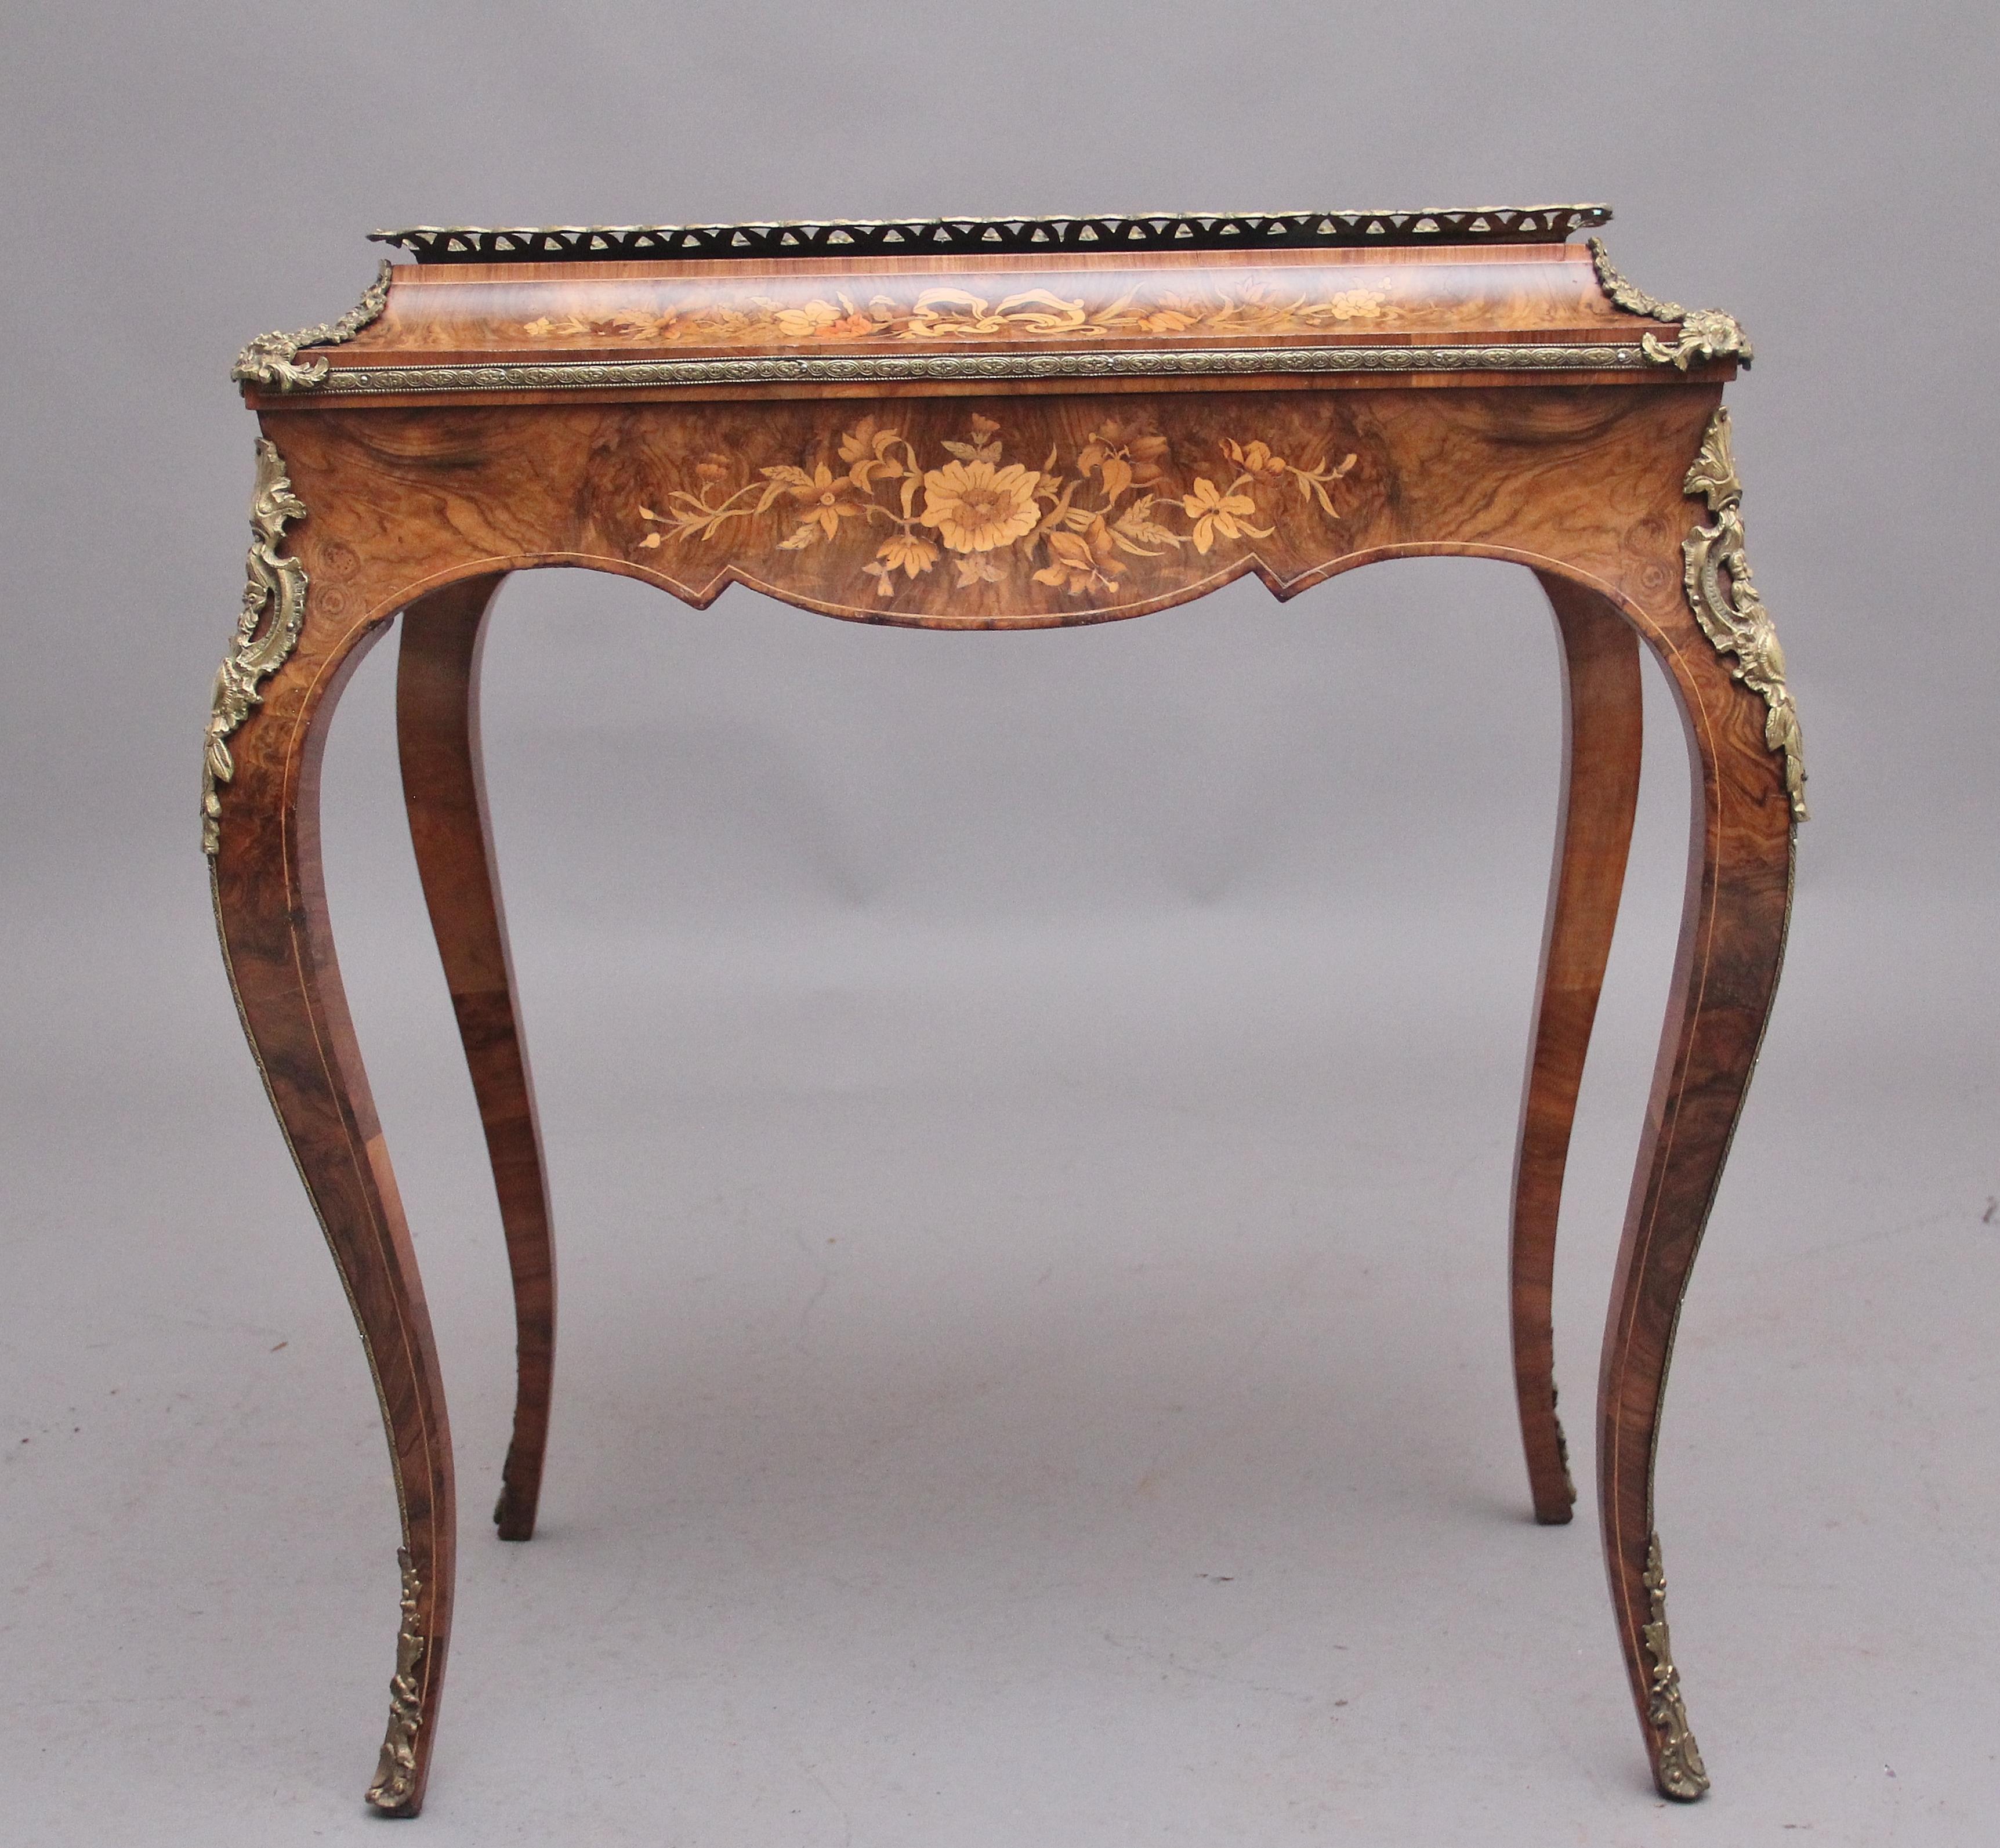 Victorian 19th Century Burr Walnut and Marquetry Jardiniere For Sale